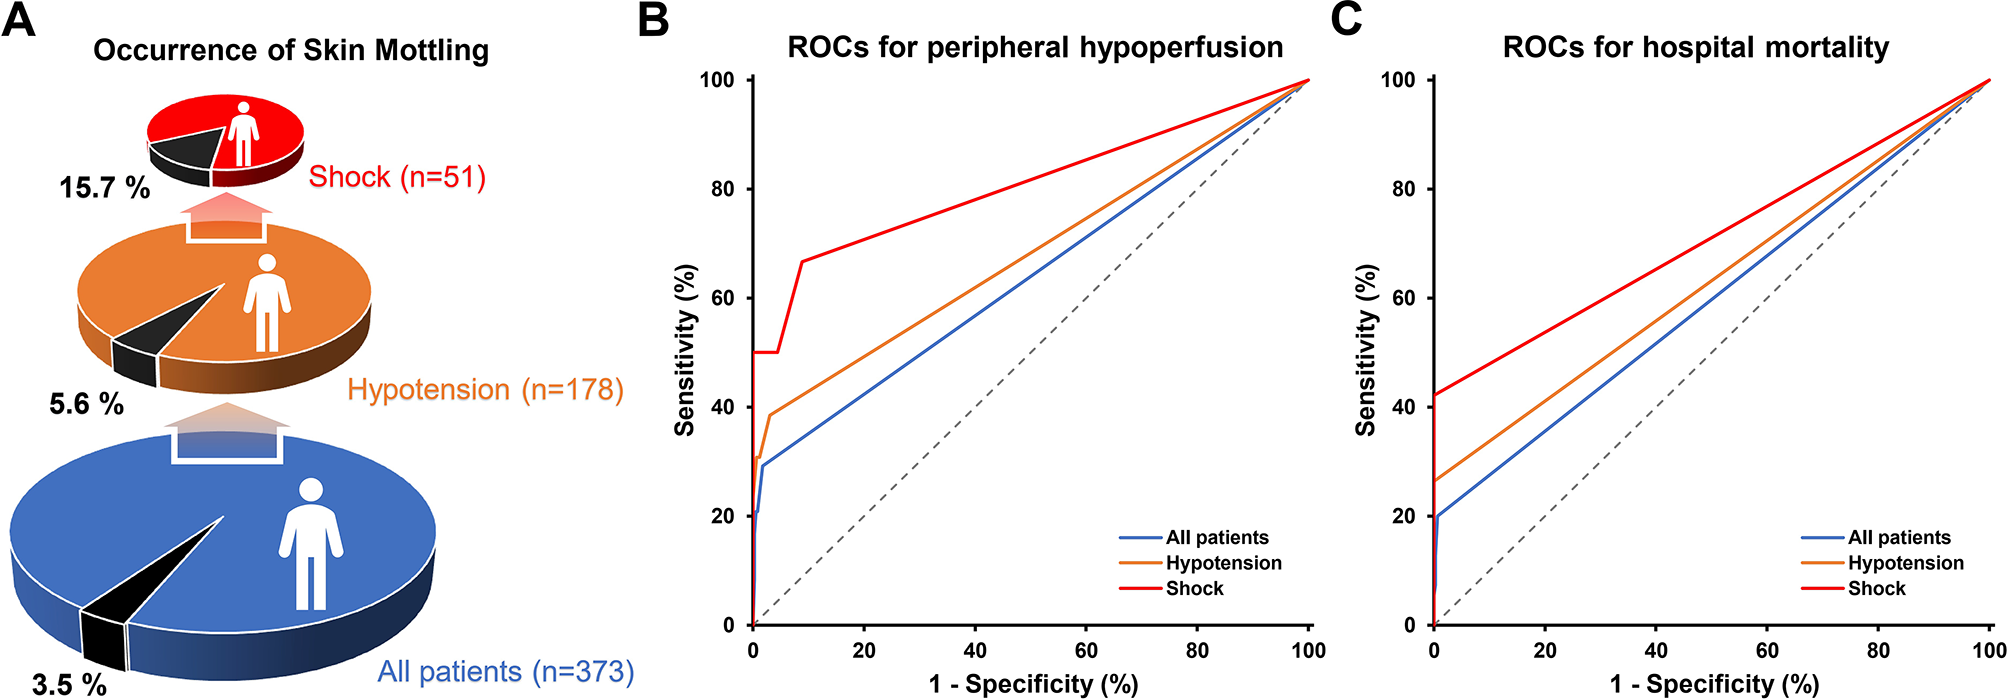 Skin mottling score assesses peripheral tissue hypoperfusion in critically ill patients following cardiac surgery